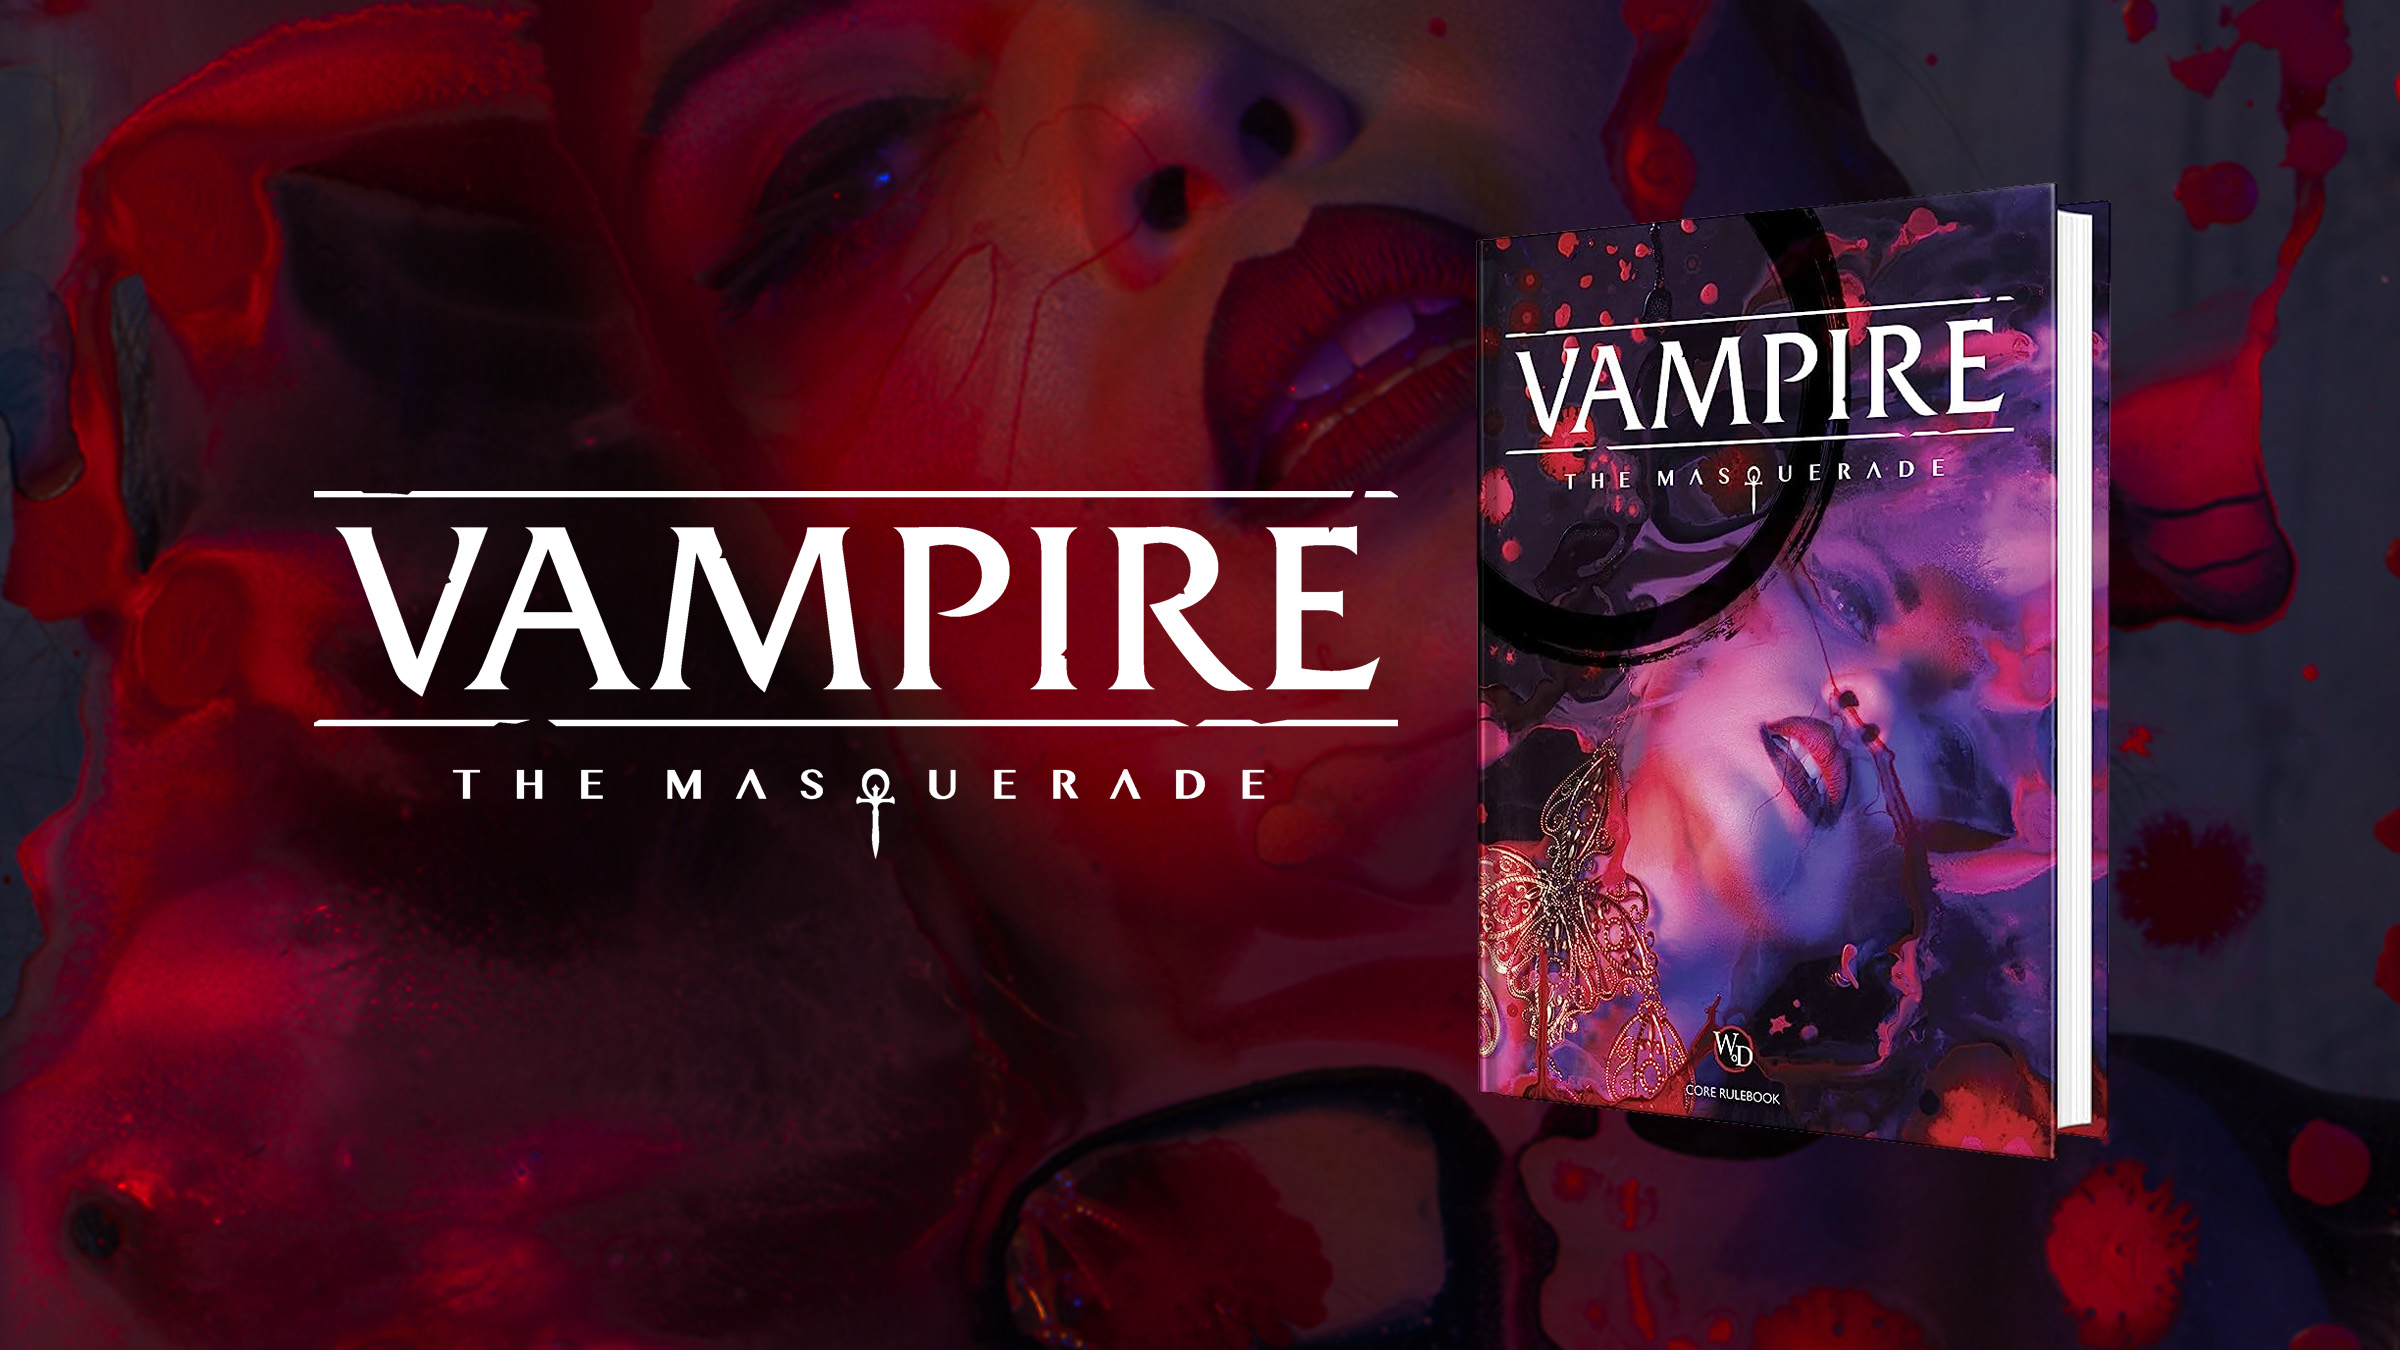 Where To Start With Vampire: The Masquerade – A Beginner's Guide To V:TM